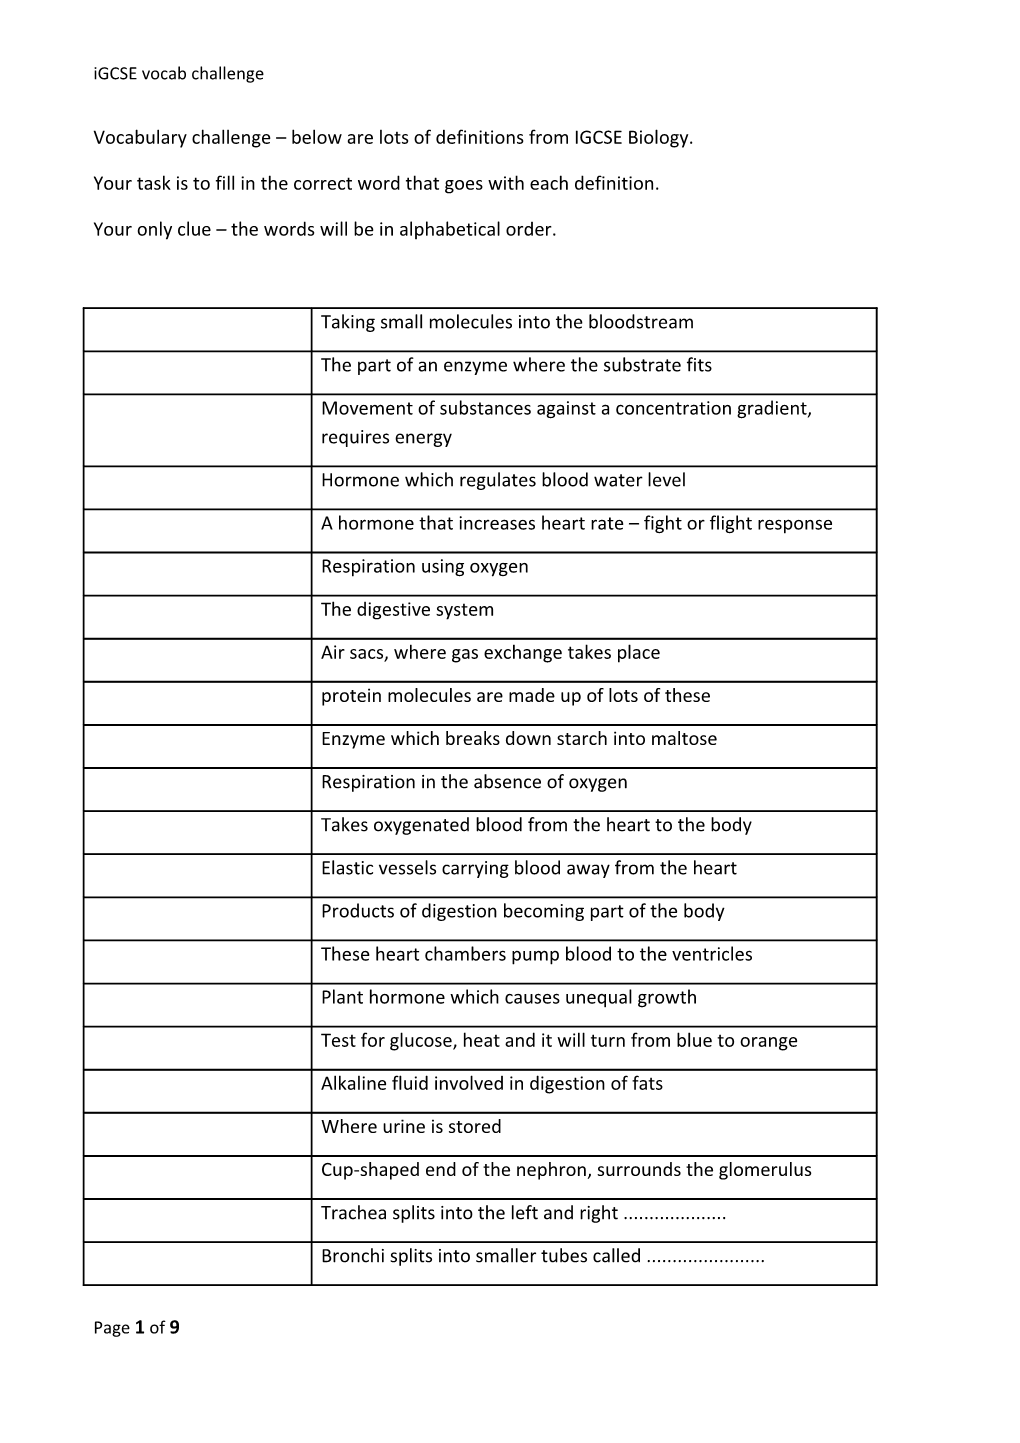 Vocabulary Challenge Below Are Lots of Definitions from IGCSE Biology